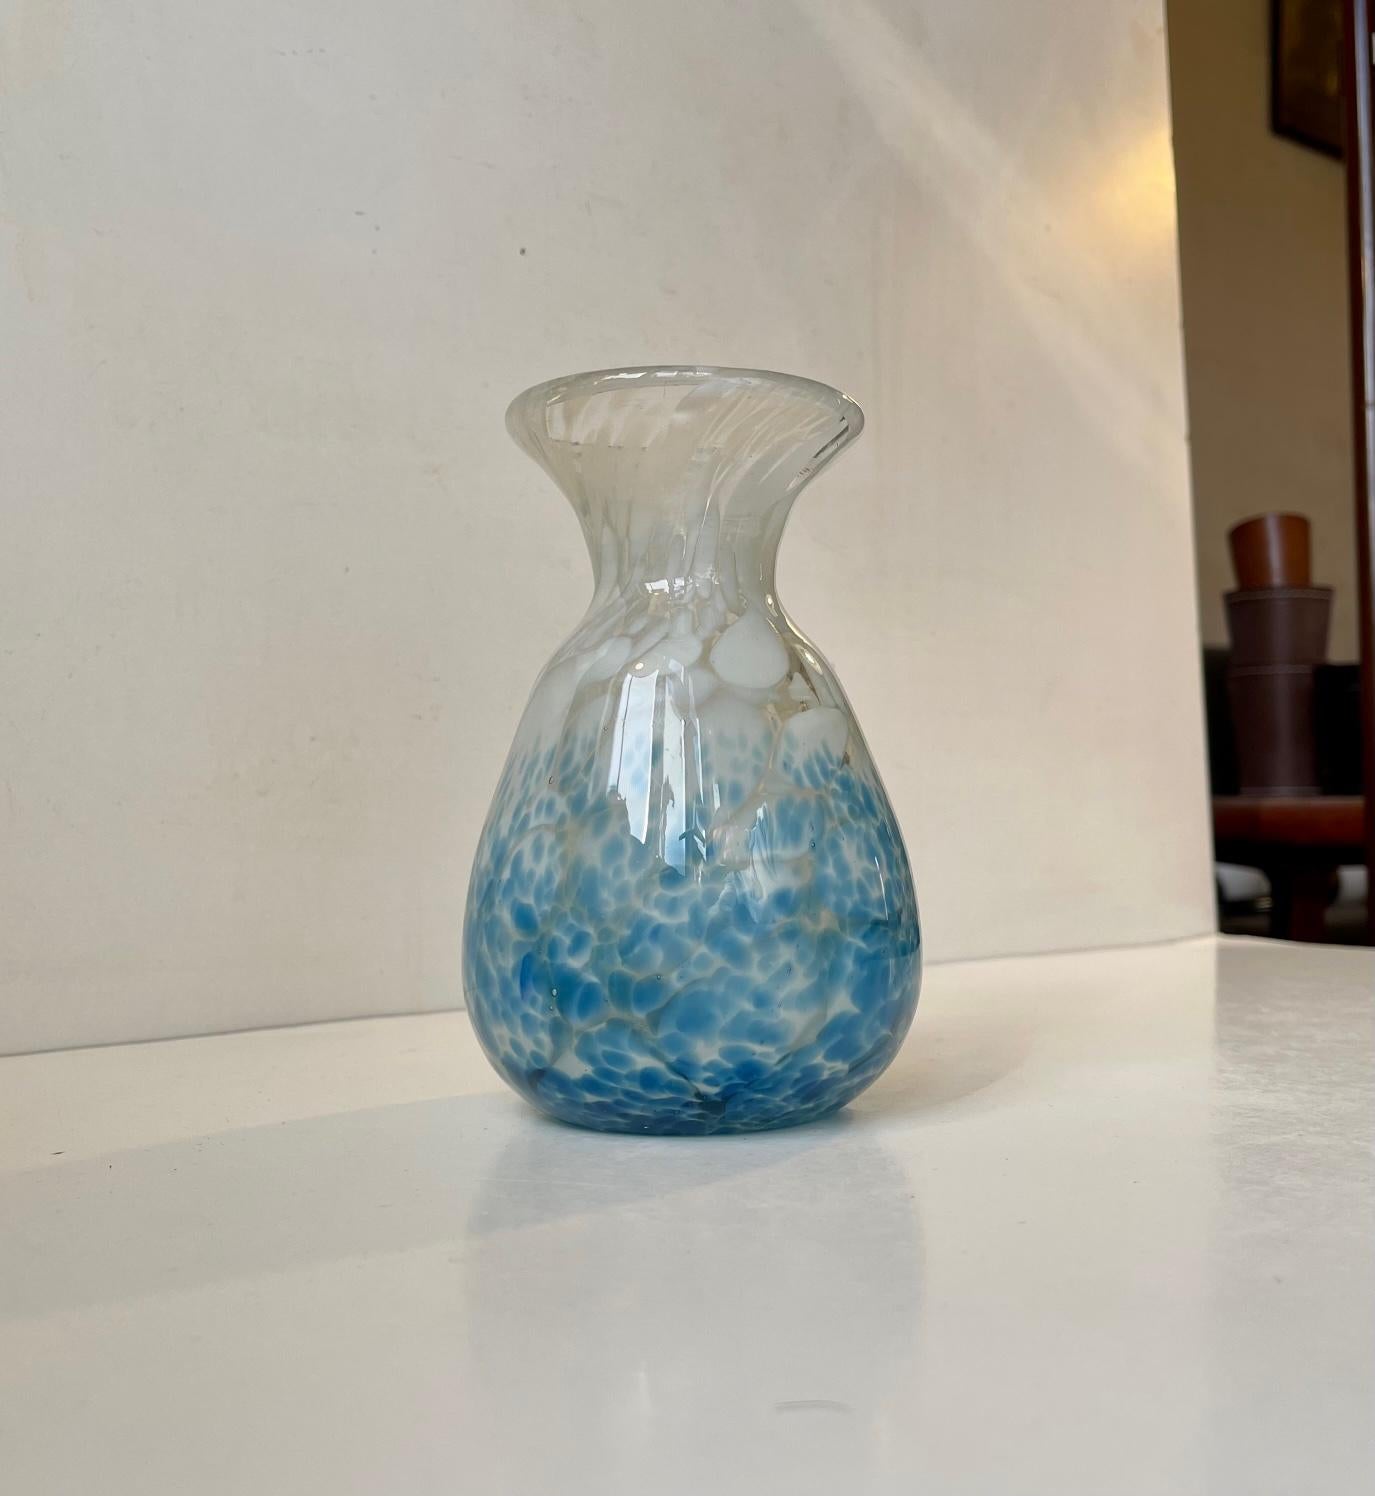 Hand Blown spatter vase in delicate blue and white glass. Designed and manufactured by Antonin Rükl & Sons in Bohemia during the 1930s. Vibrant colors and contrasts. Measurements: Height: 15 cm, Diameter: 10/8 cm.